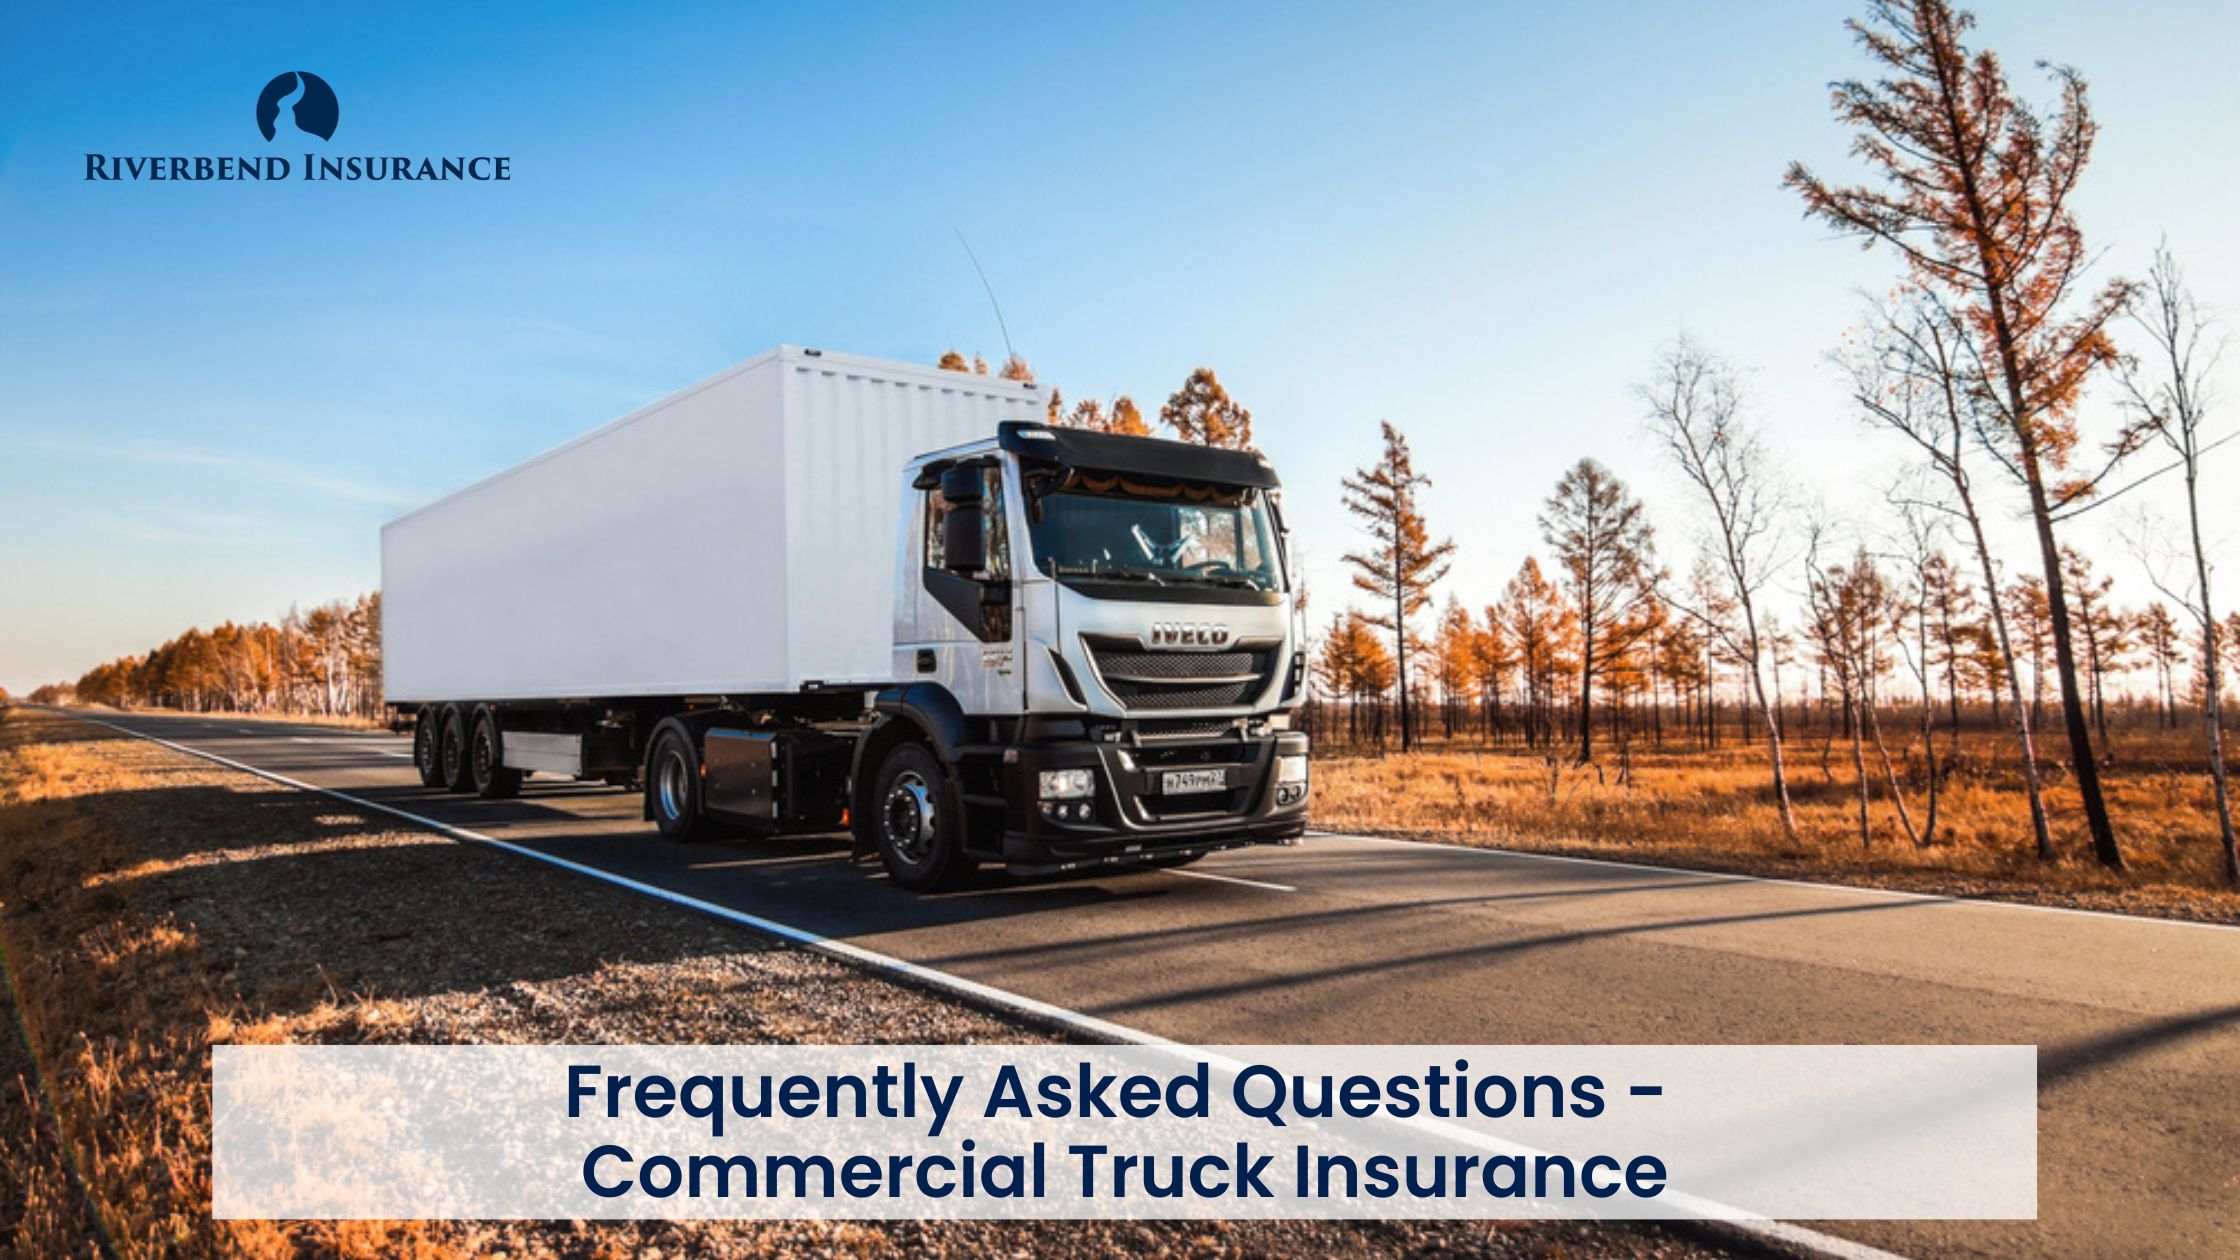 Frequently Asked Questions - Commercial Truck Insurance